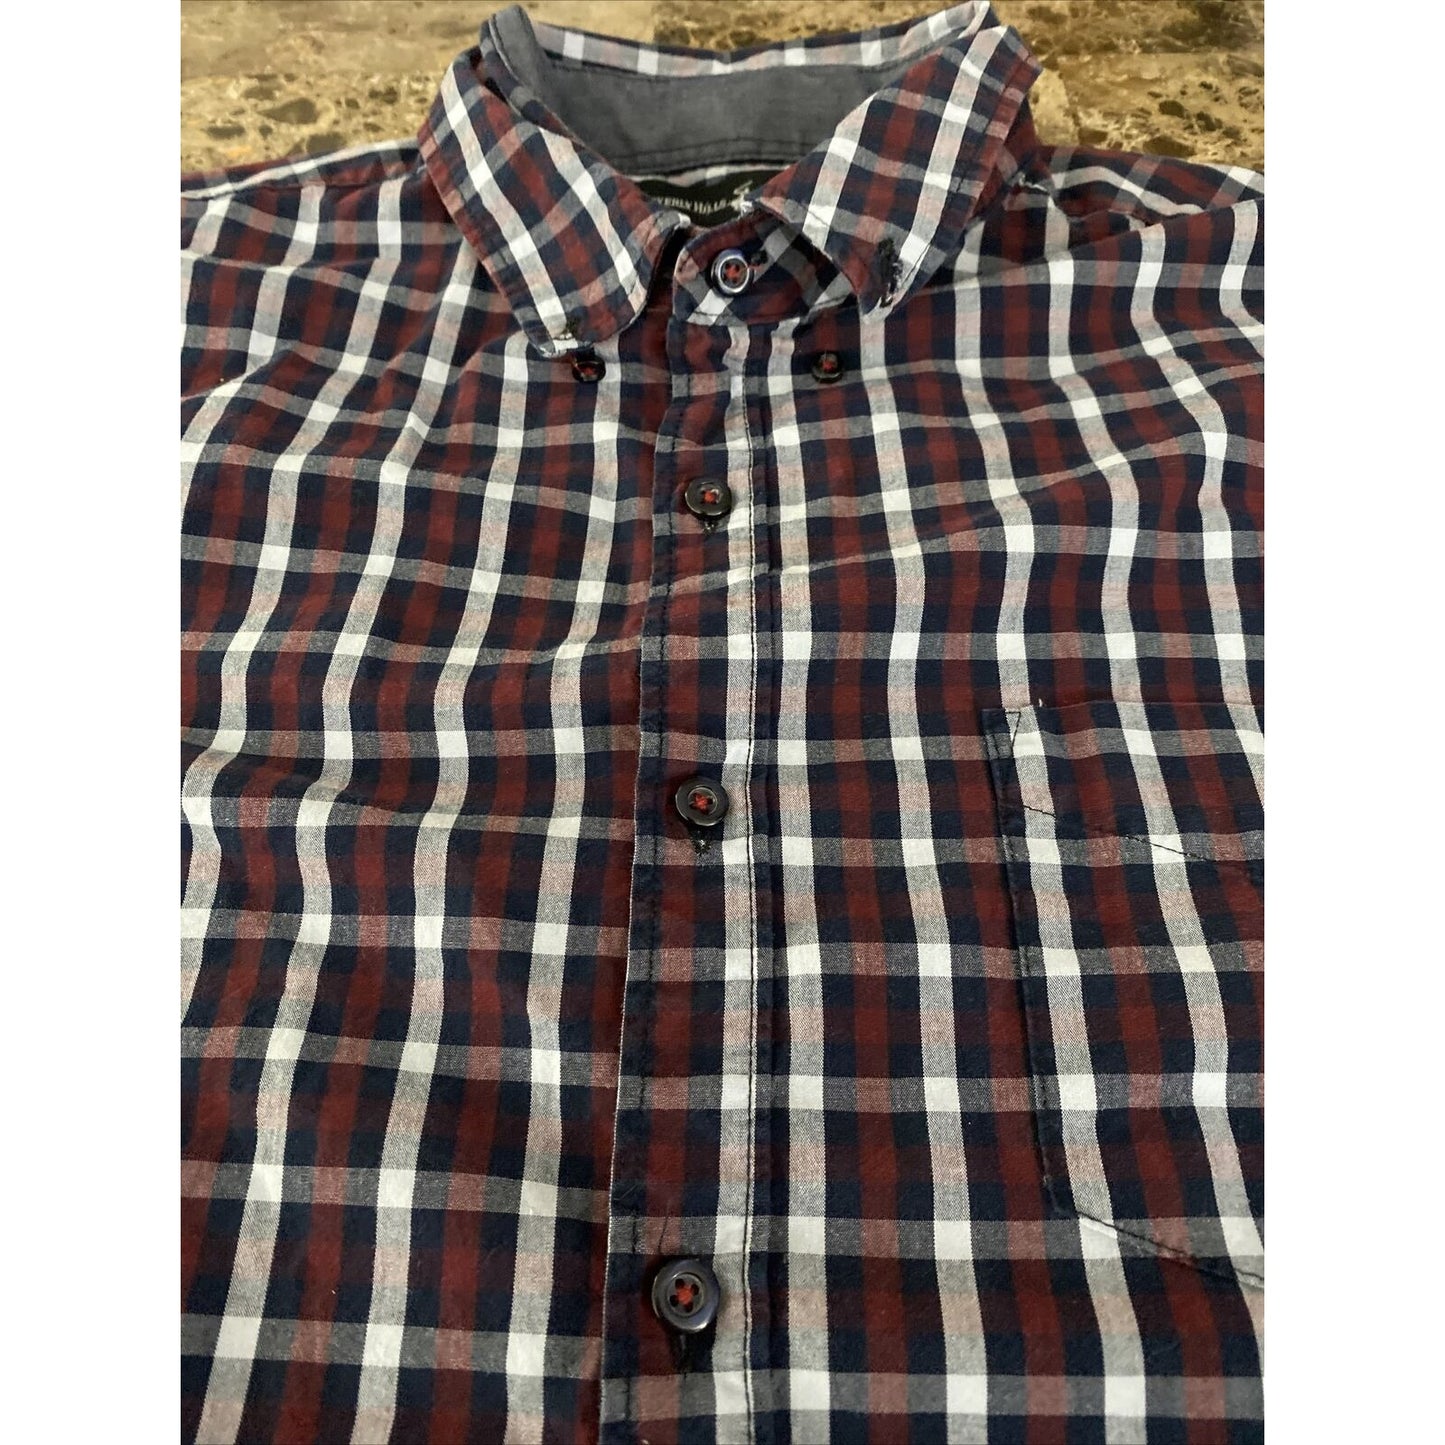 Beverly Hills Polo Club Mens Large White Red Black Plaid Button-down Long Sleeve